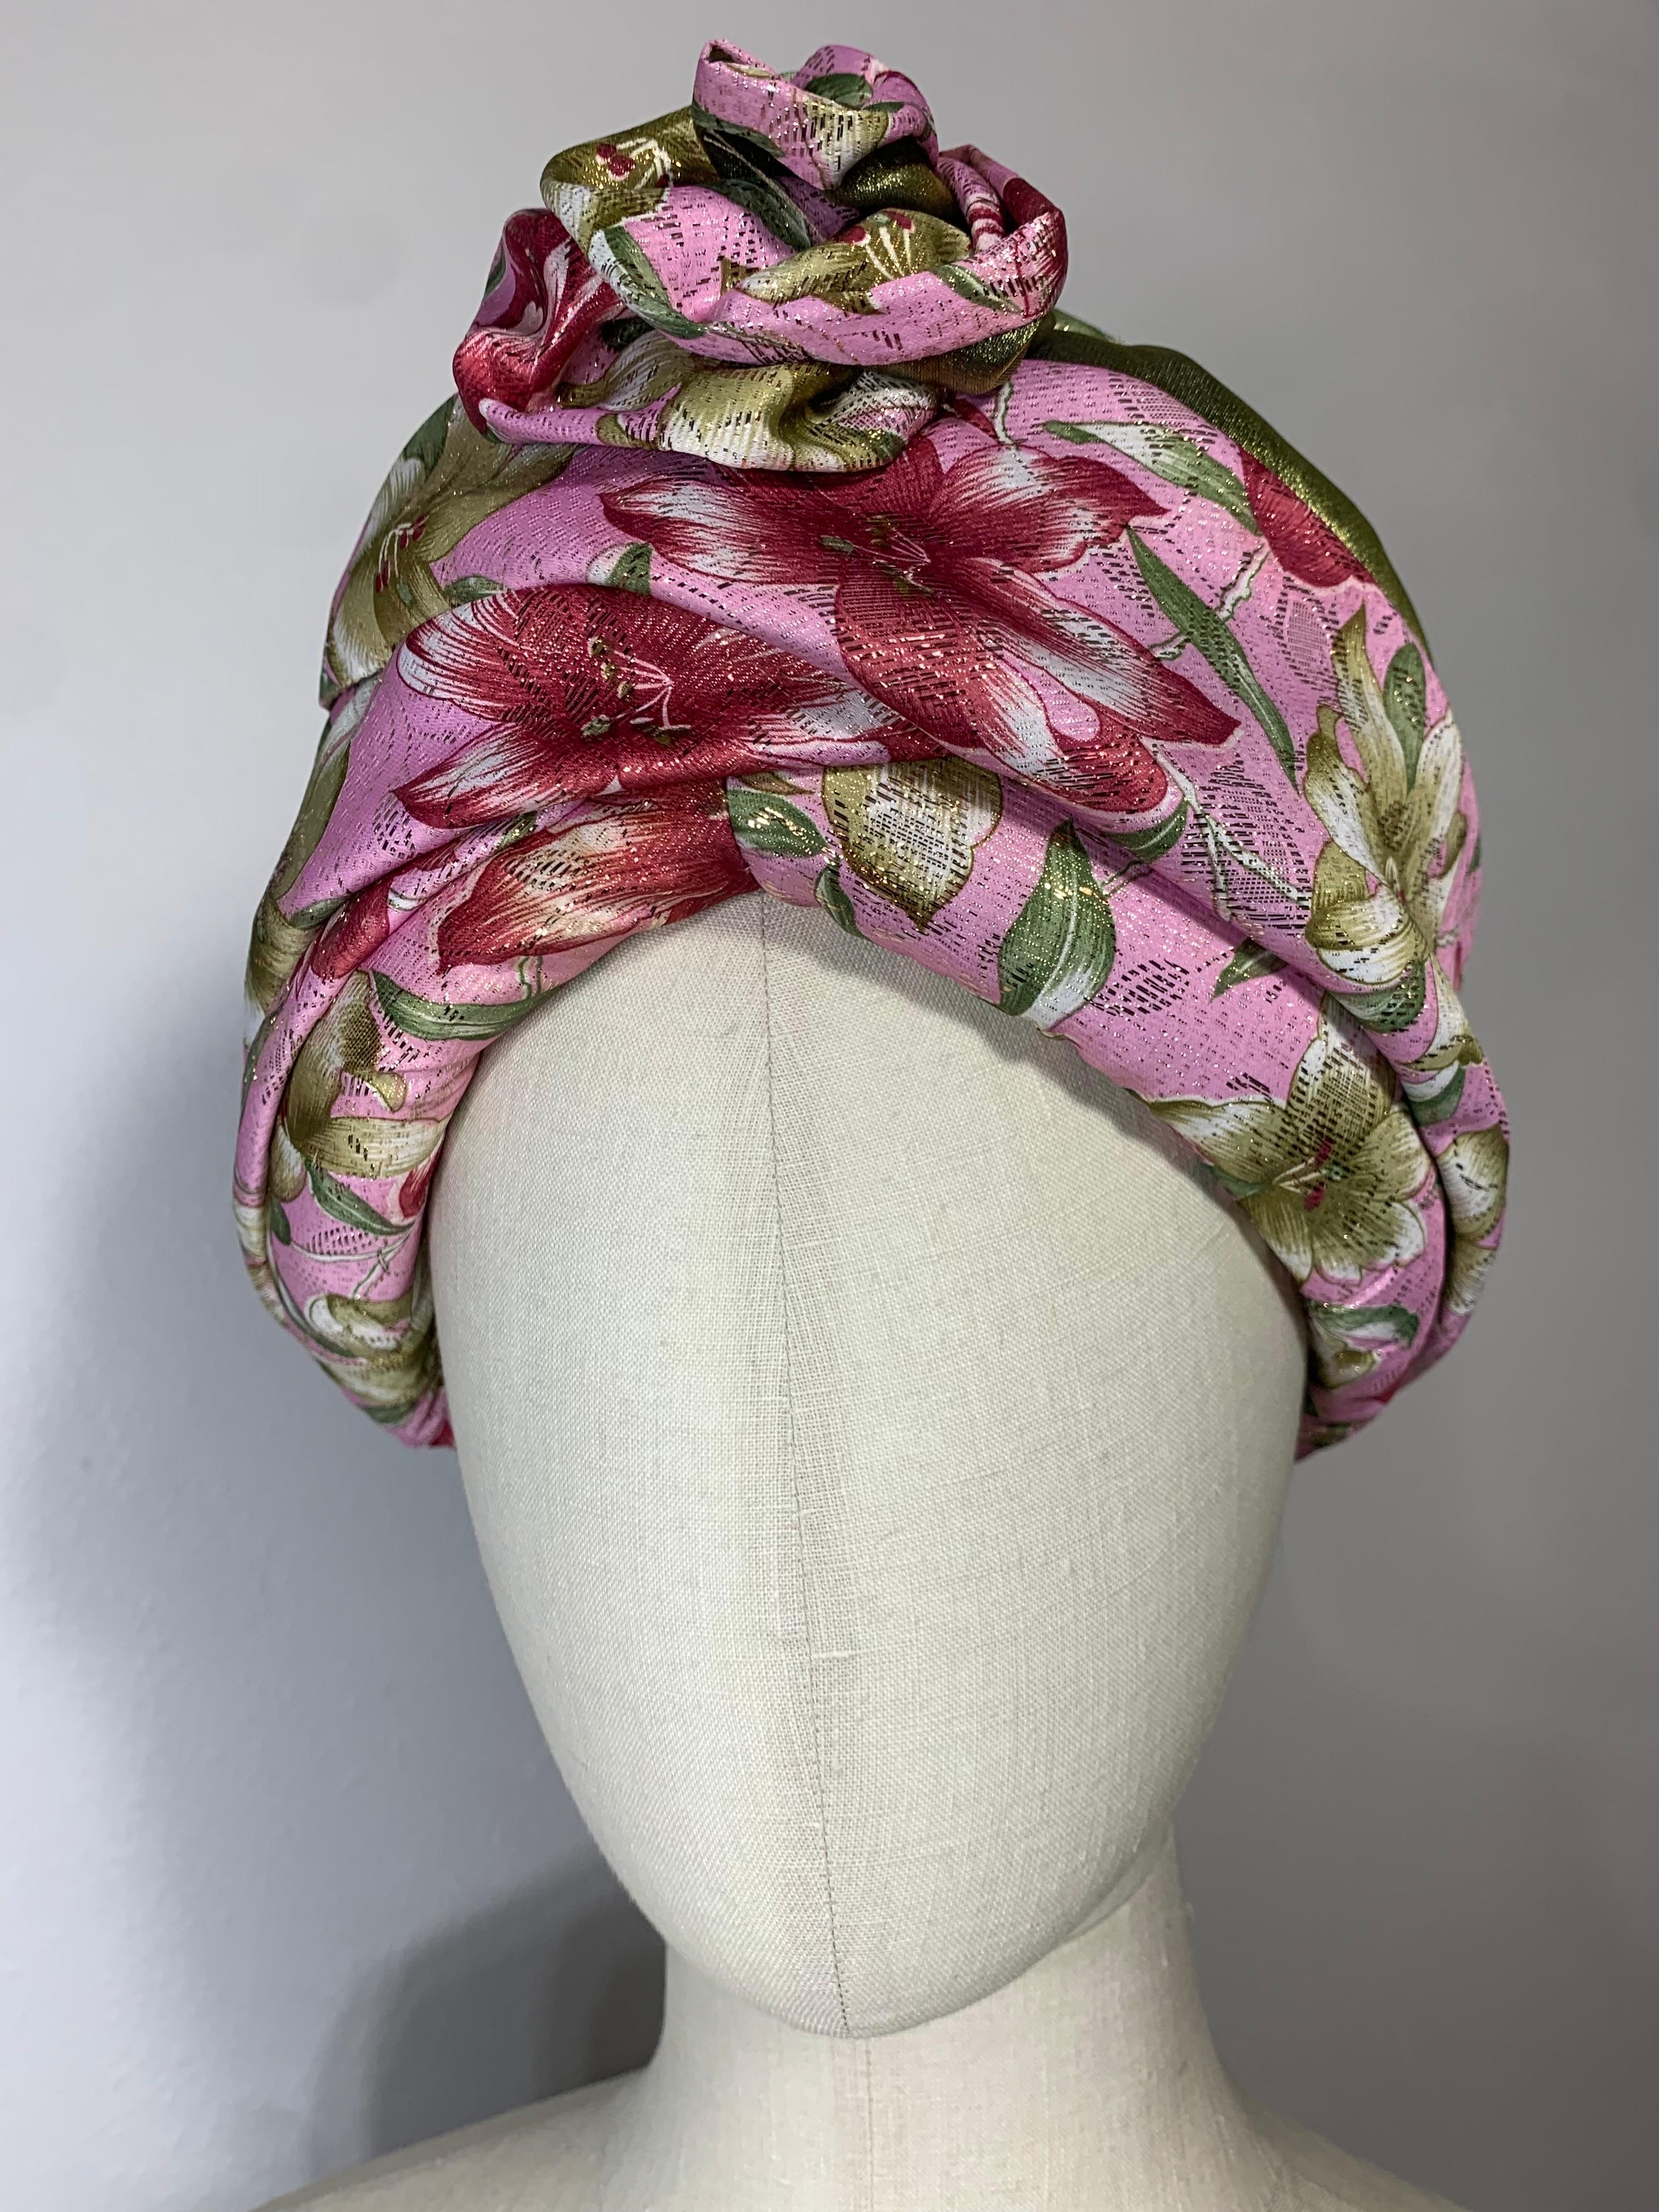 Custom Made Spring/Summer Pink Satin & Gold Lame Lily Print Turban with Flower at Front:  Made by Suzanne Custom Millinery, This exquisite turban is padded and formed over a stiff buckram base. Front floral embellishment is made of matching print